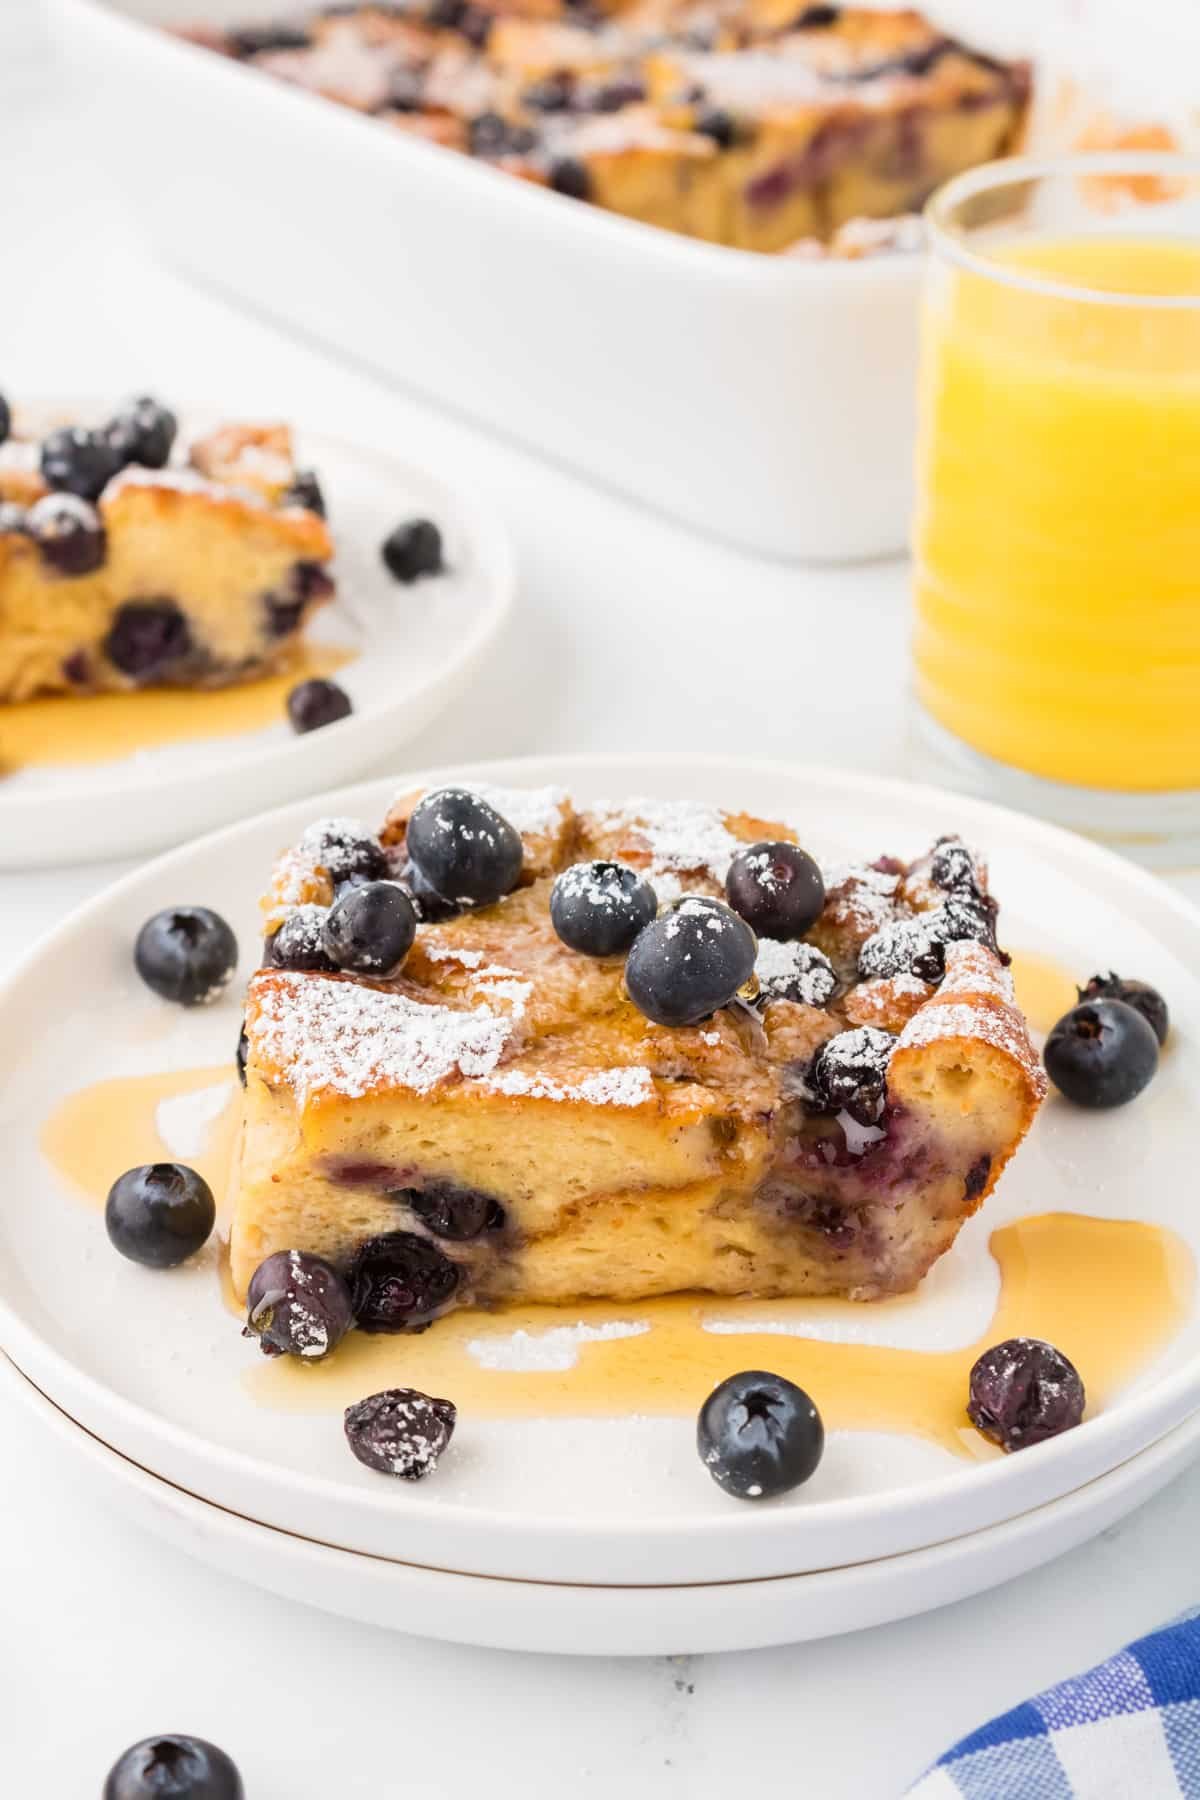 A square of baked brioche French toast garnished with blueberries and drizzled with maple syrup.